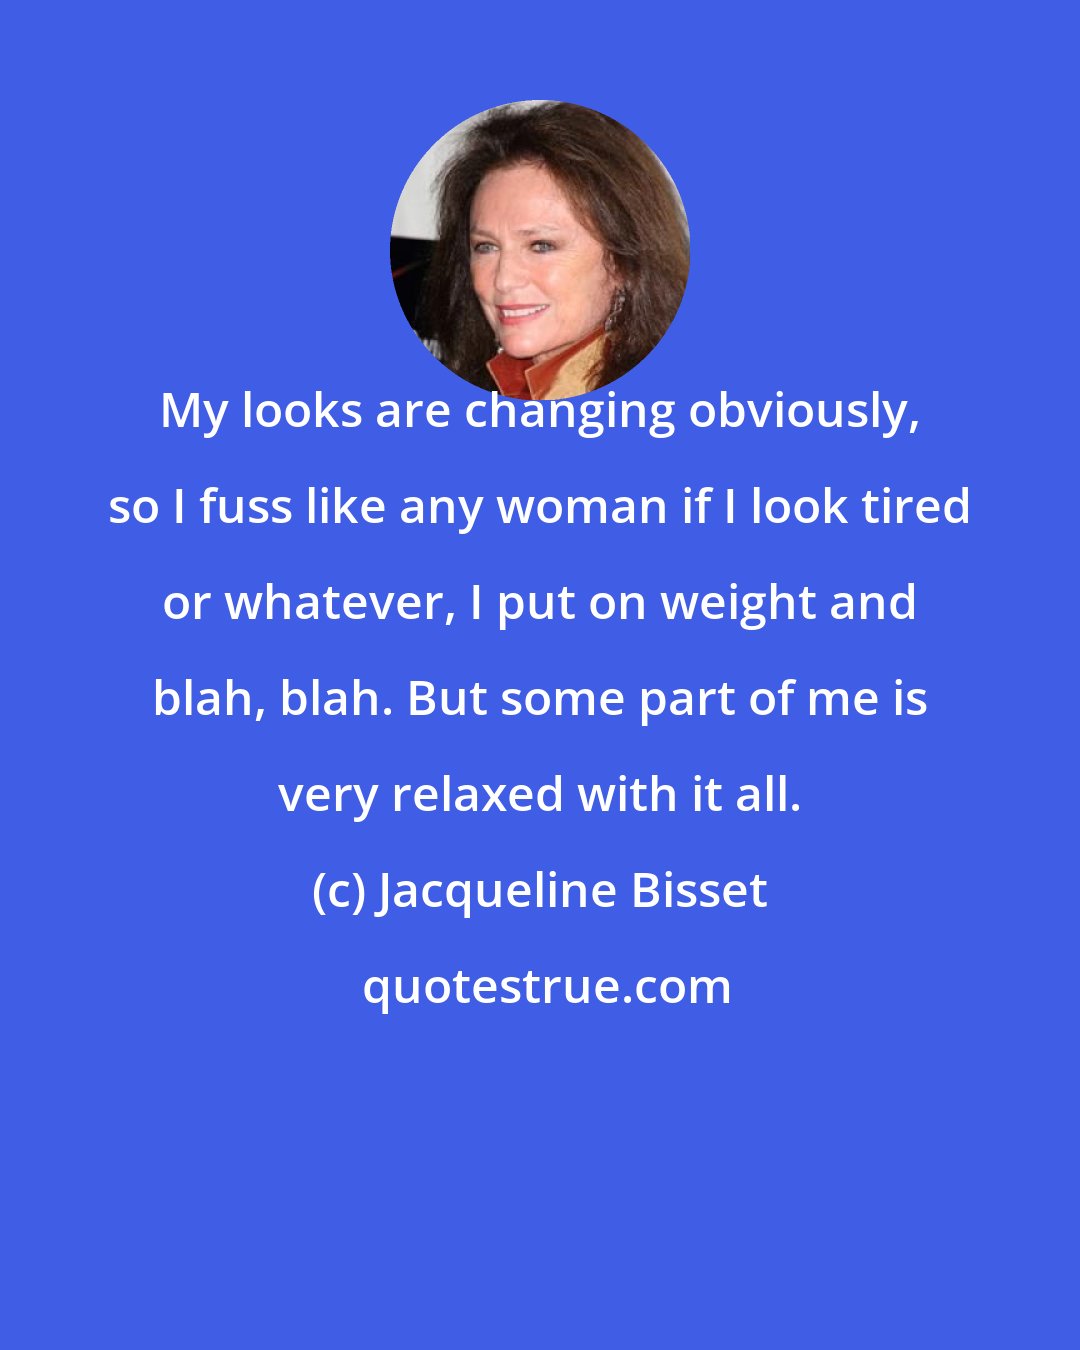 Jacqueline Bisset: My looks are changing obviously, so I fuss like any woman if I look tired or whatever, I put on weight and blah, blah. But some part of me is very relaxed with it all.